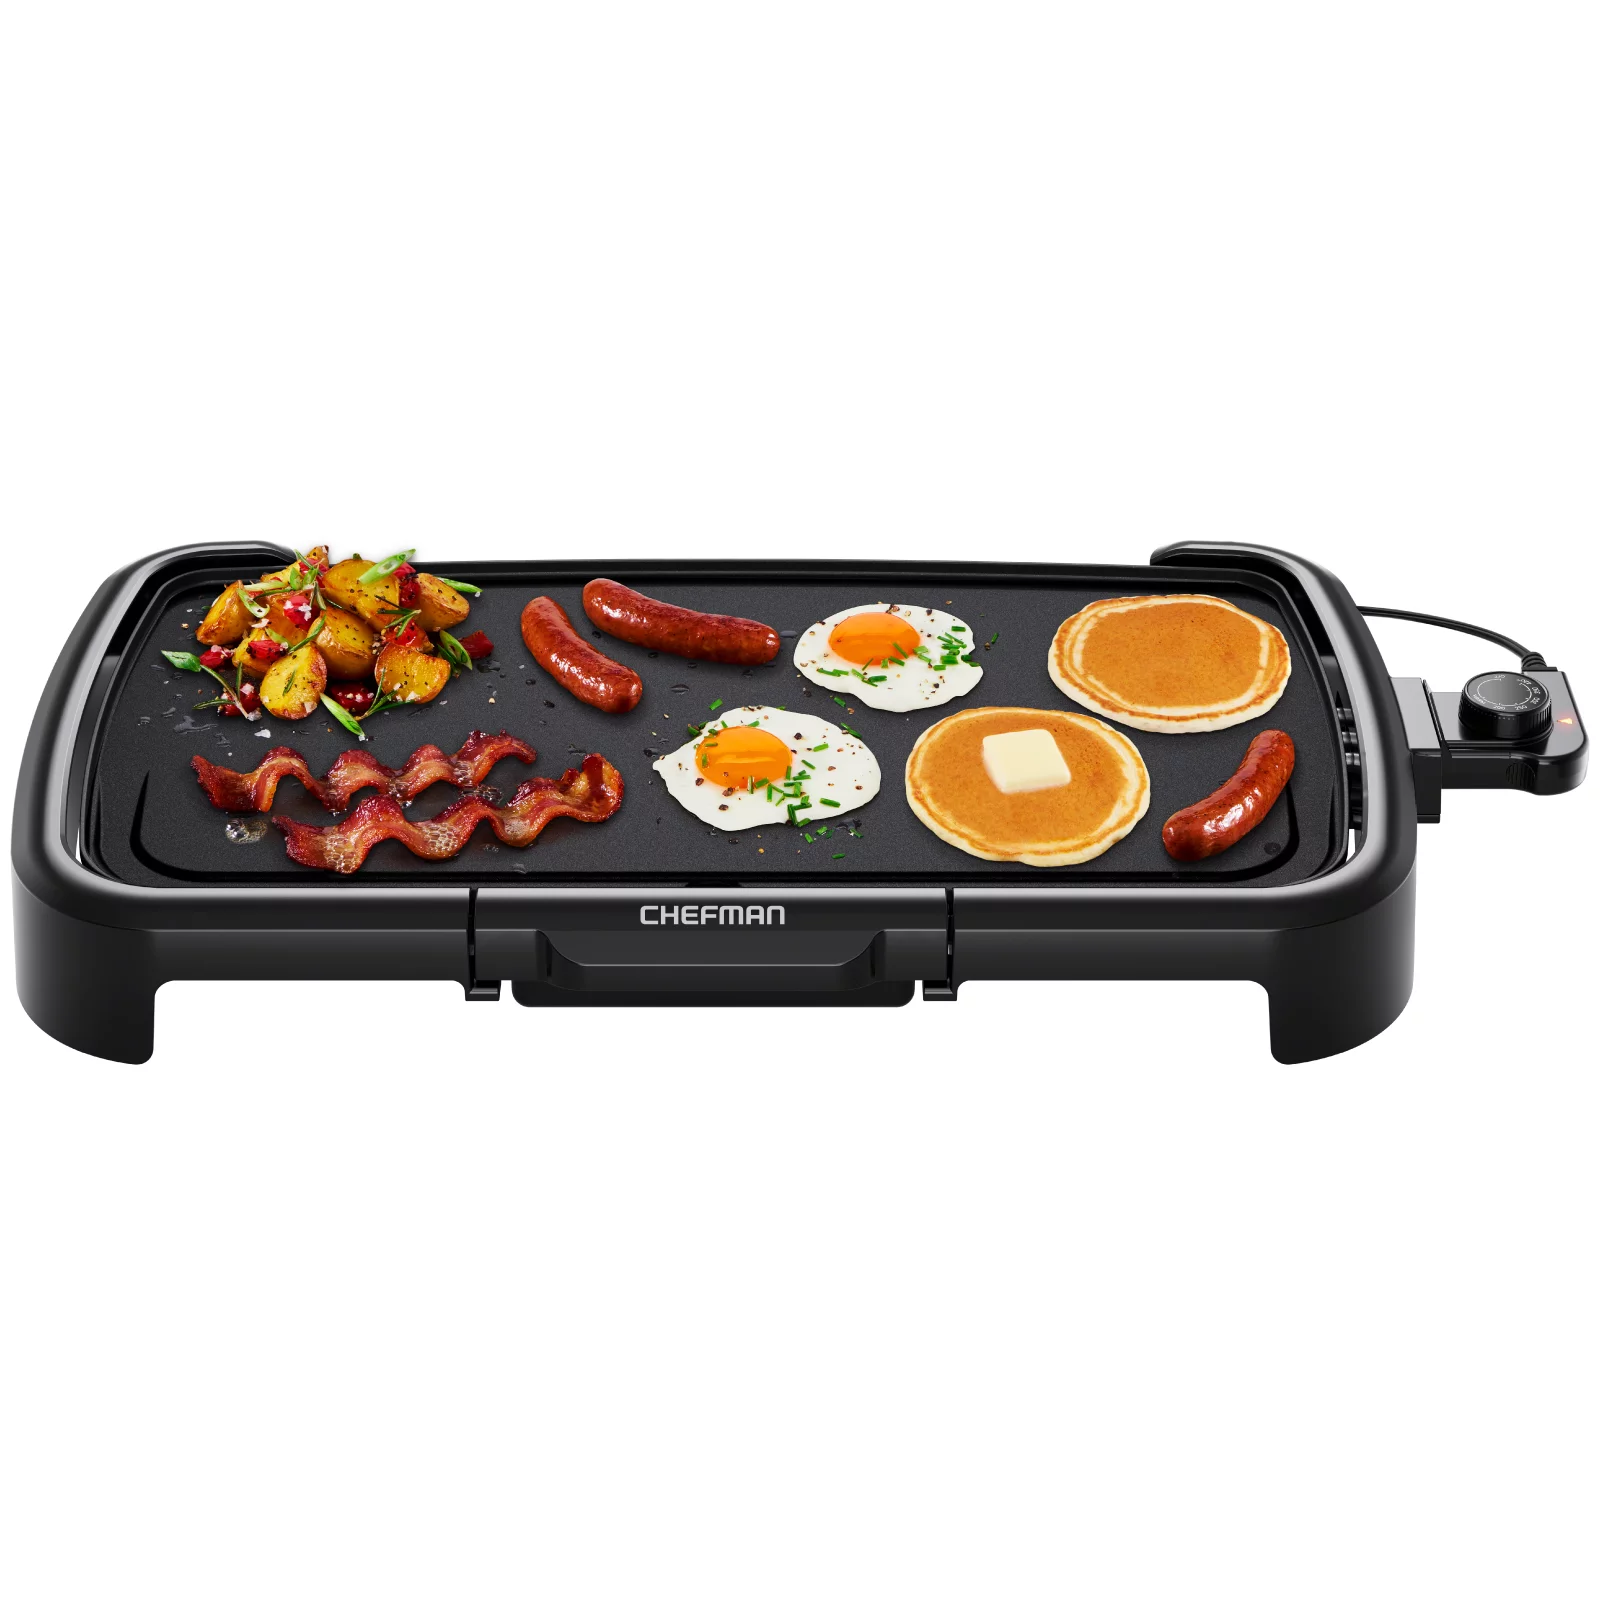 Primary image for Chefman All-Purpose 10" x 20" Nonstick Extra-Large Griddle, Black